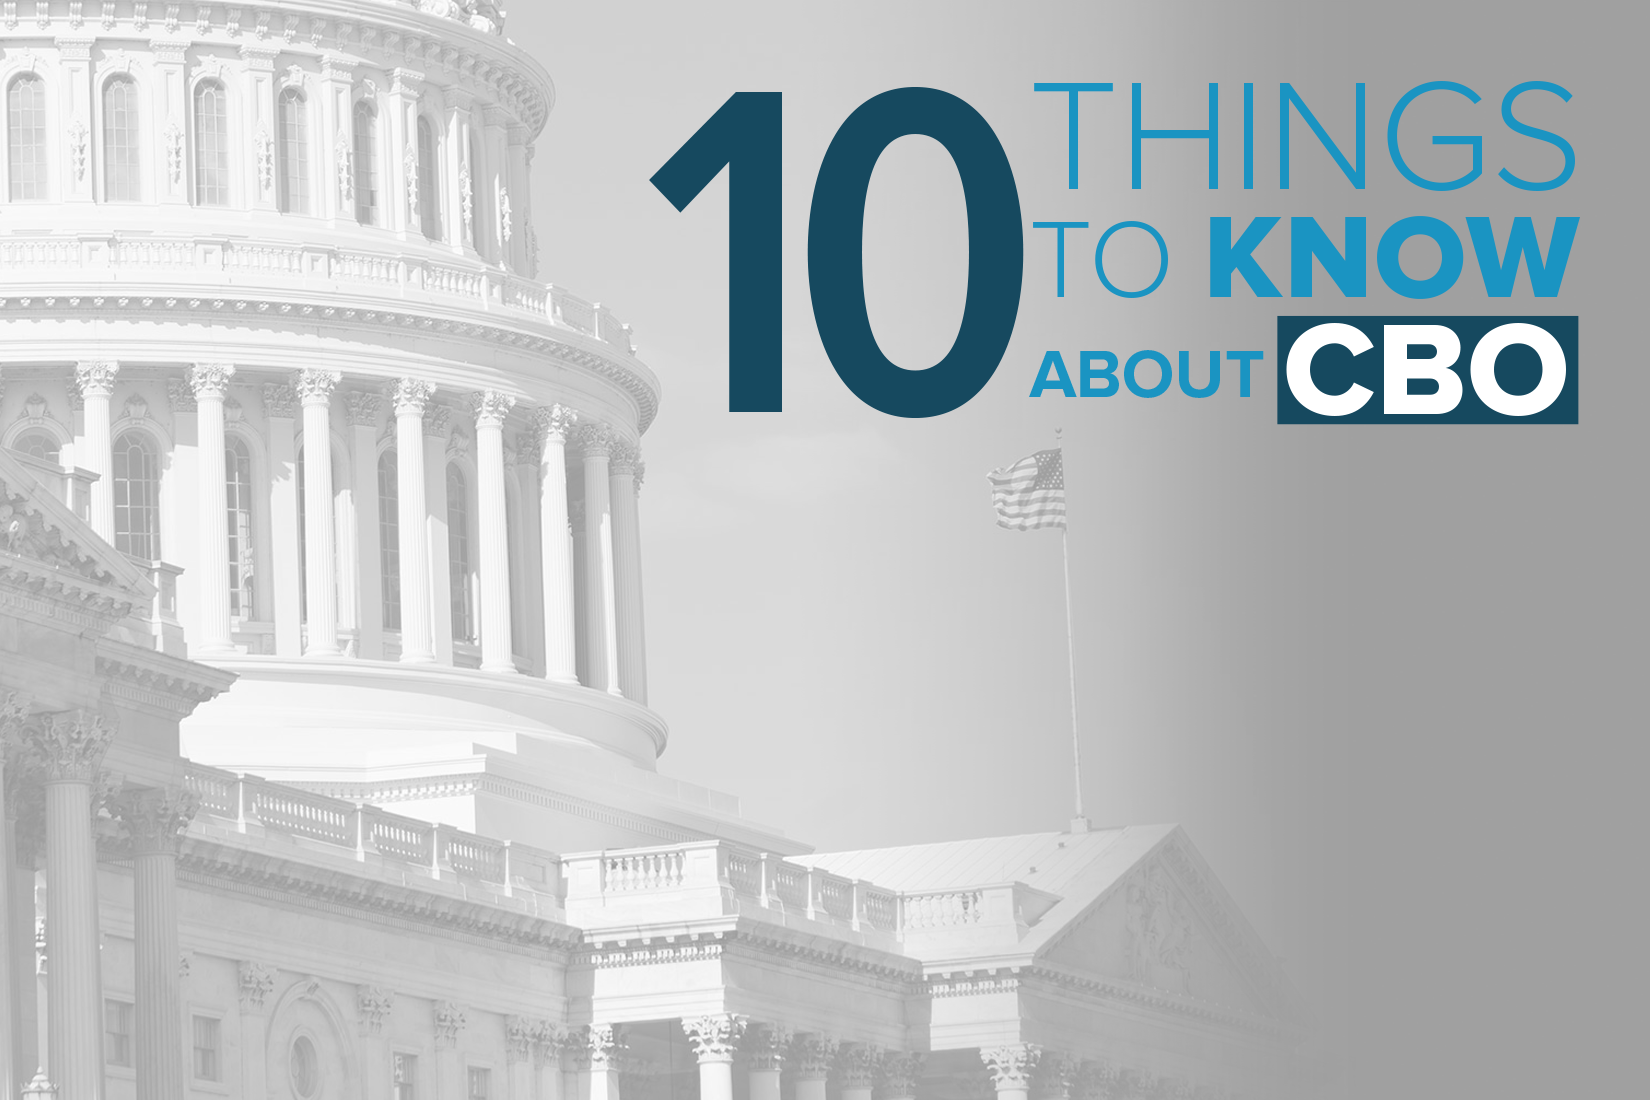 10 Things to Know About CBO